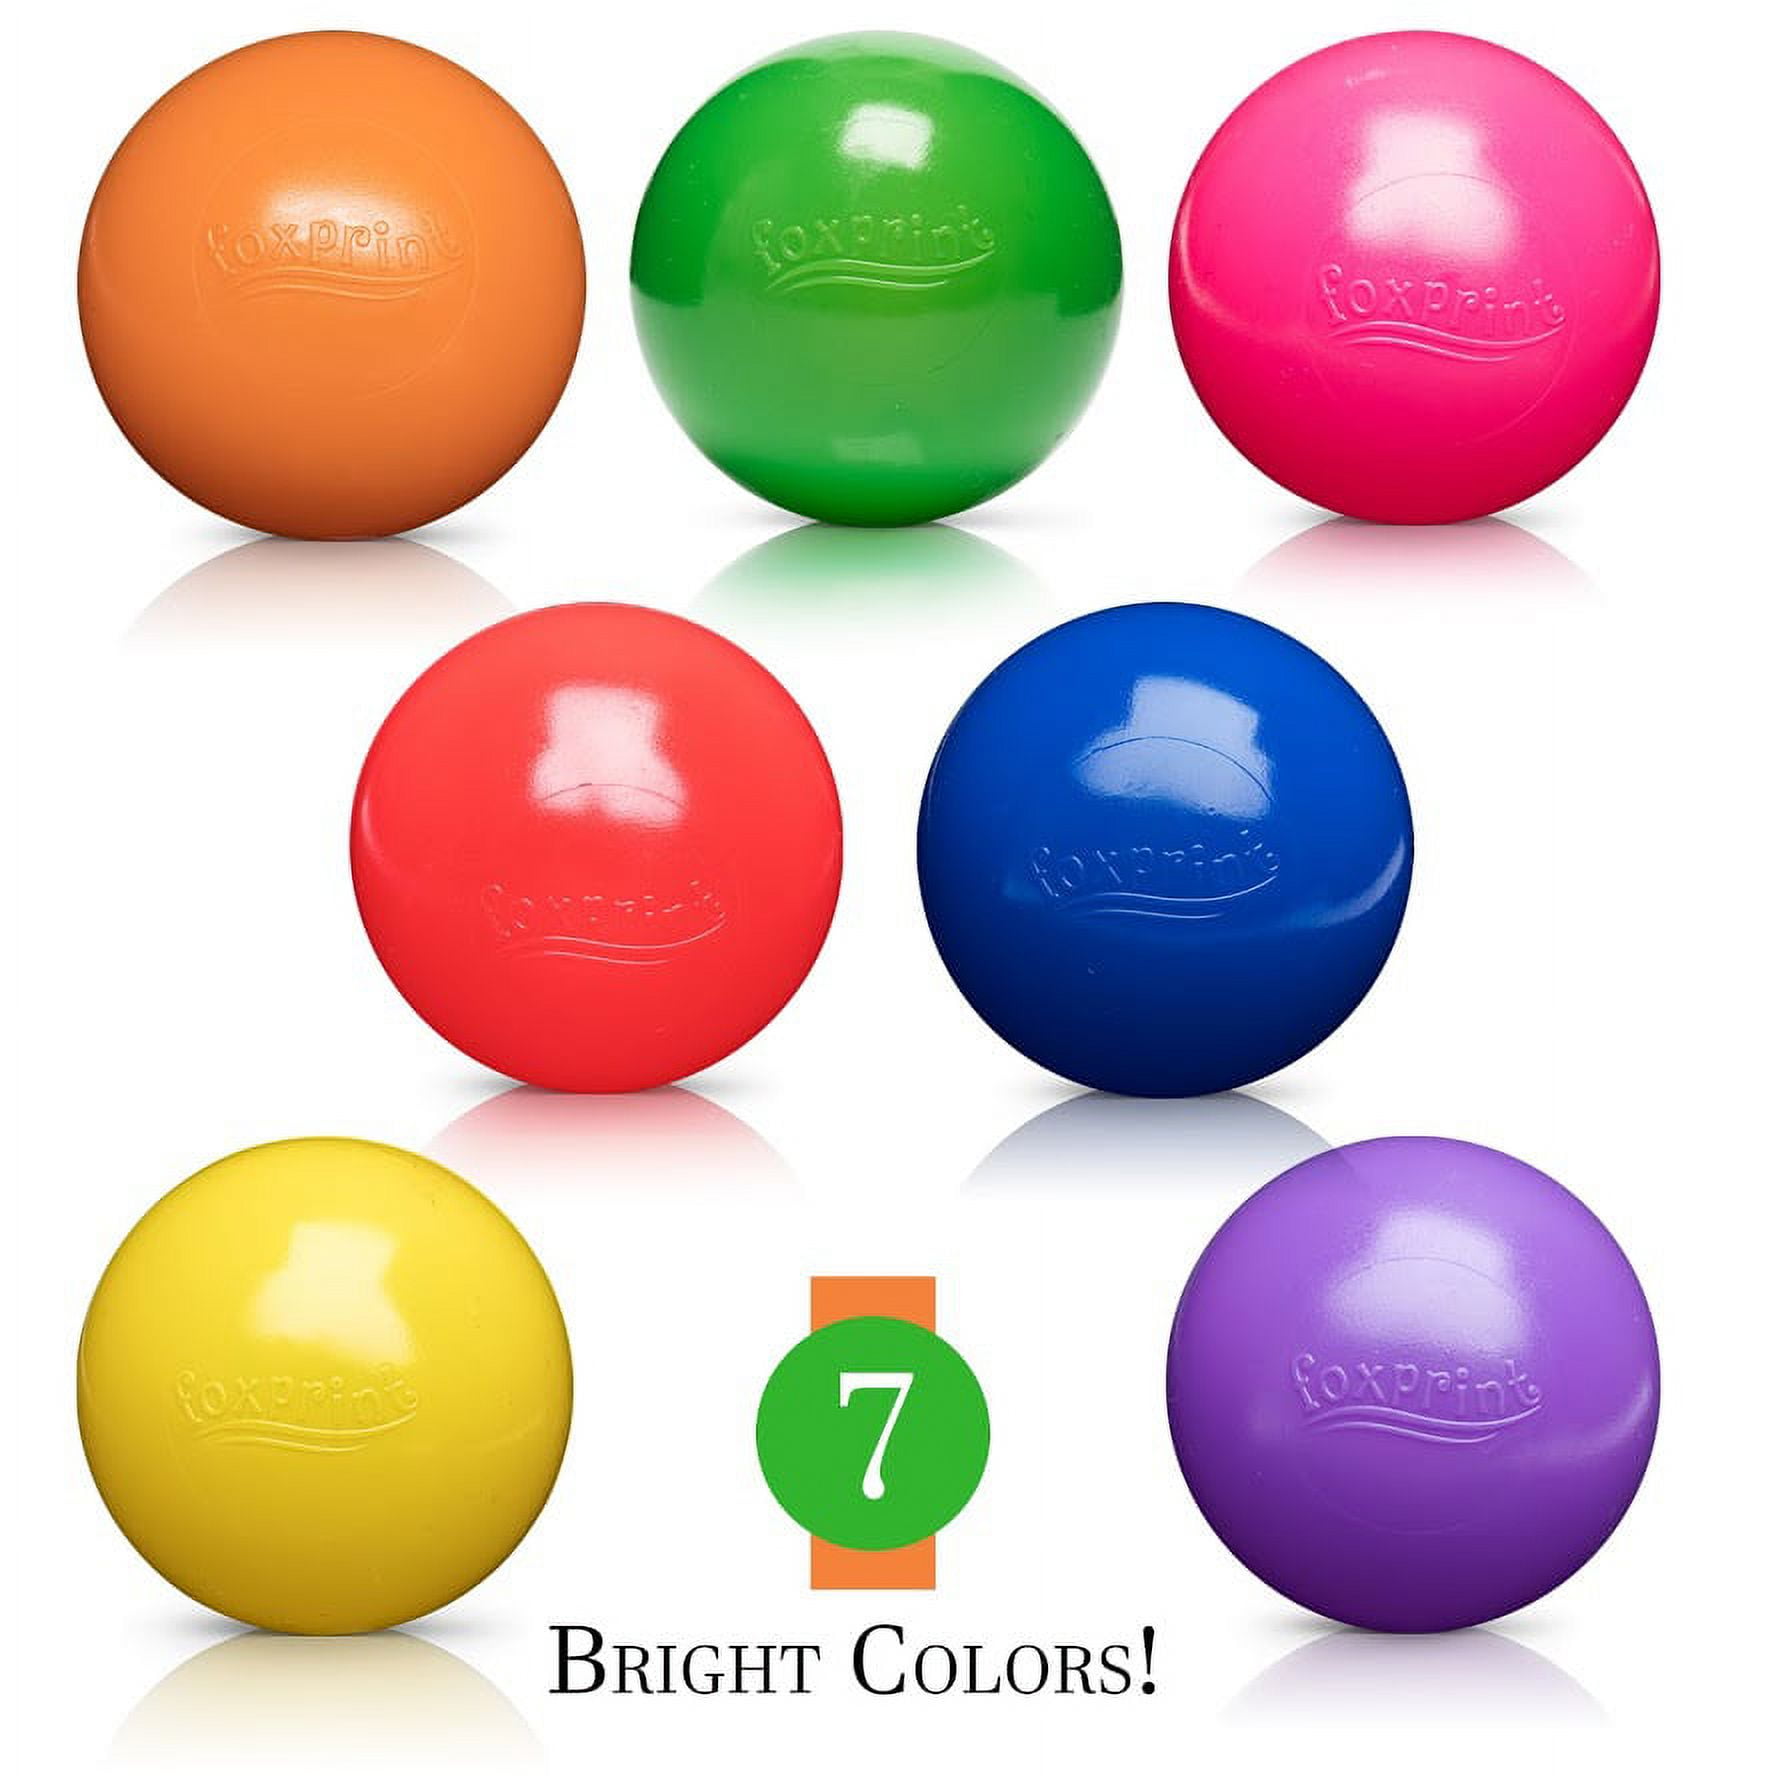 12 Pcs Soft Foam Balls Lightweight Mini Indoor Toys,Sponge Play Balls  Colorful Indoor Balls for Indoor Outdoor Playing Crafts Birthday Party  Favors Bag Fillers 